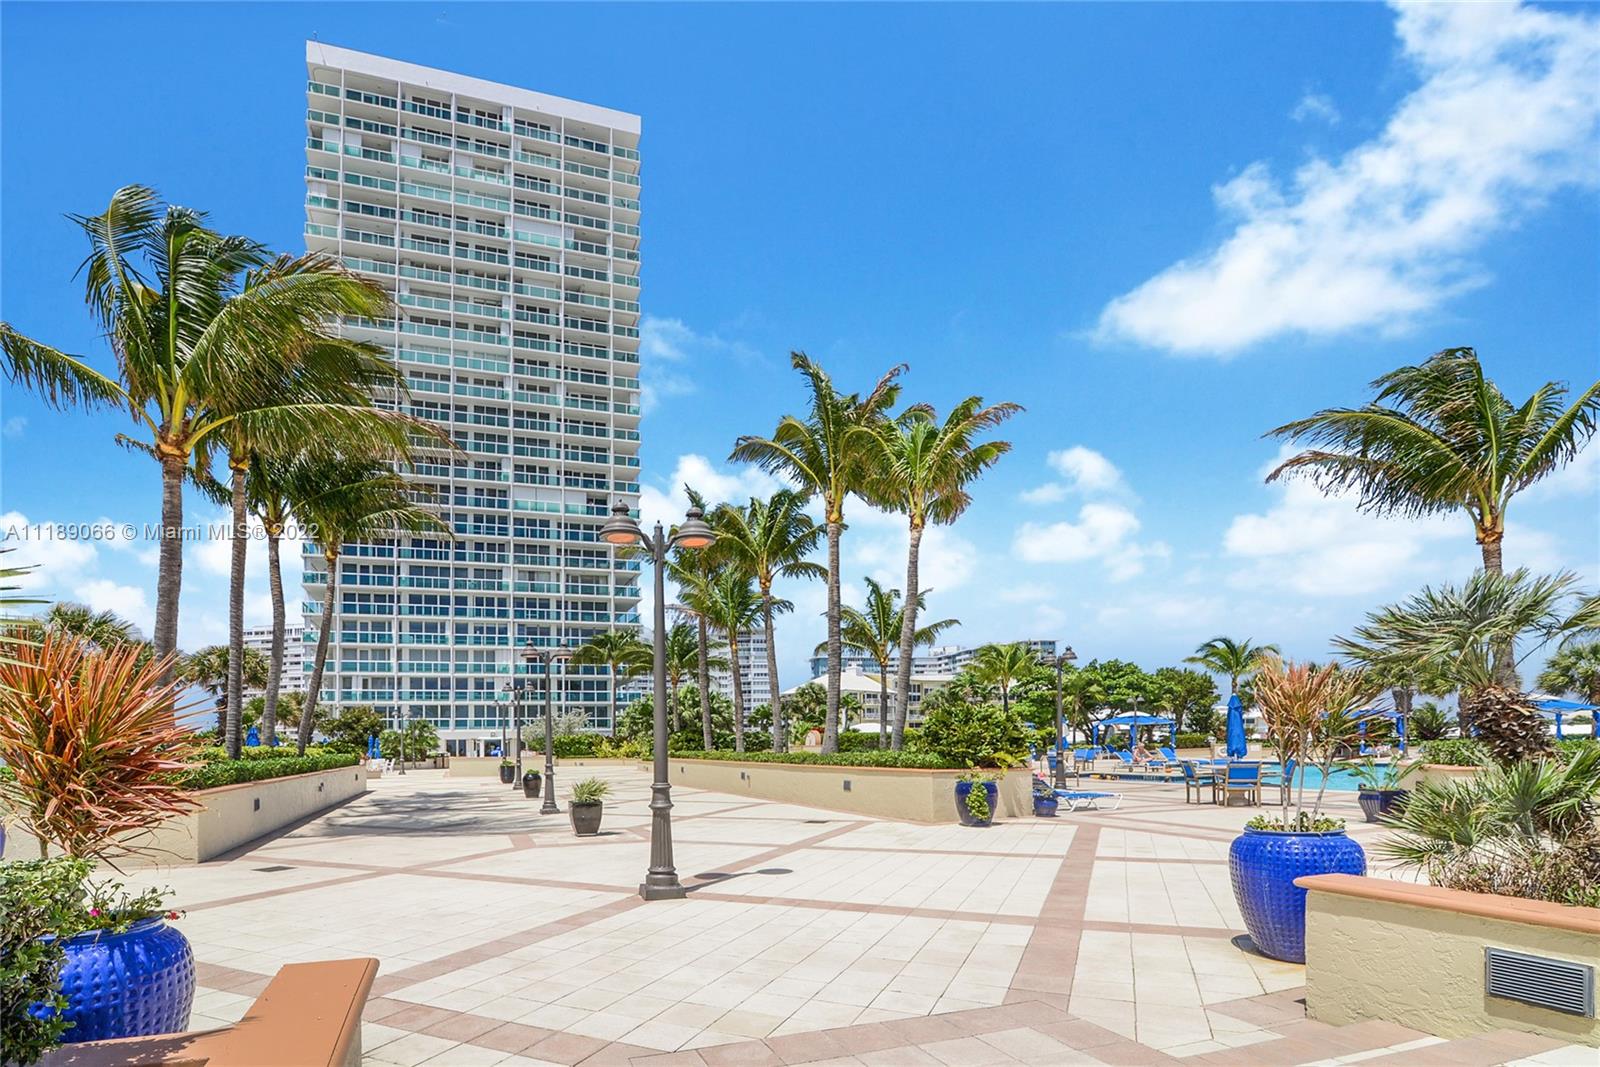 Located on the 18th floor overlooking the Intracoastal waterway & ocean in Fort Lauderdale, this updated two-bedroom, two-bath condo is ready to move in. The unit has floor-to-ceiling windows facing south,  a beautiful foyer, expansive living, dining, and kitchen areas, plus a large main bedroom with walk-in closets. The main bathroom features dual sinks and a jacuzzi-style tub. The Point of Americas buildings offers luxury amenities, beautifully landscaped beachfront property,  extra guest parking, pools, beach services, gym, BBQ areas, an onsite restaurant, security, and a guardhouse entry. Point of Americas is on the most expansive stretch of Fort Lauderdale Beach. *** Property may be rented unfurnished or furnished.